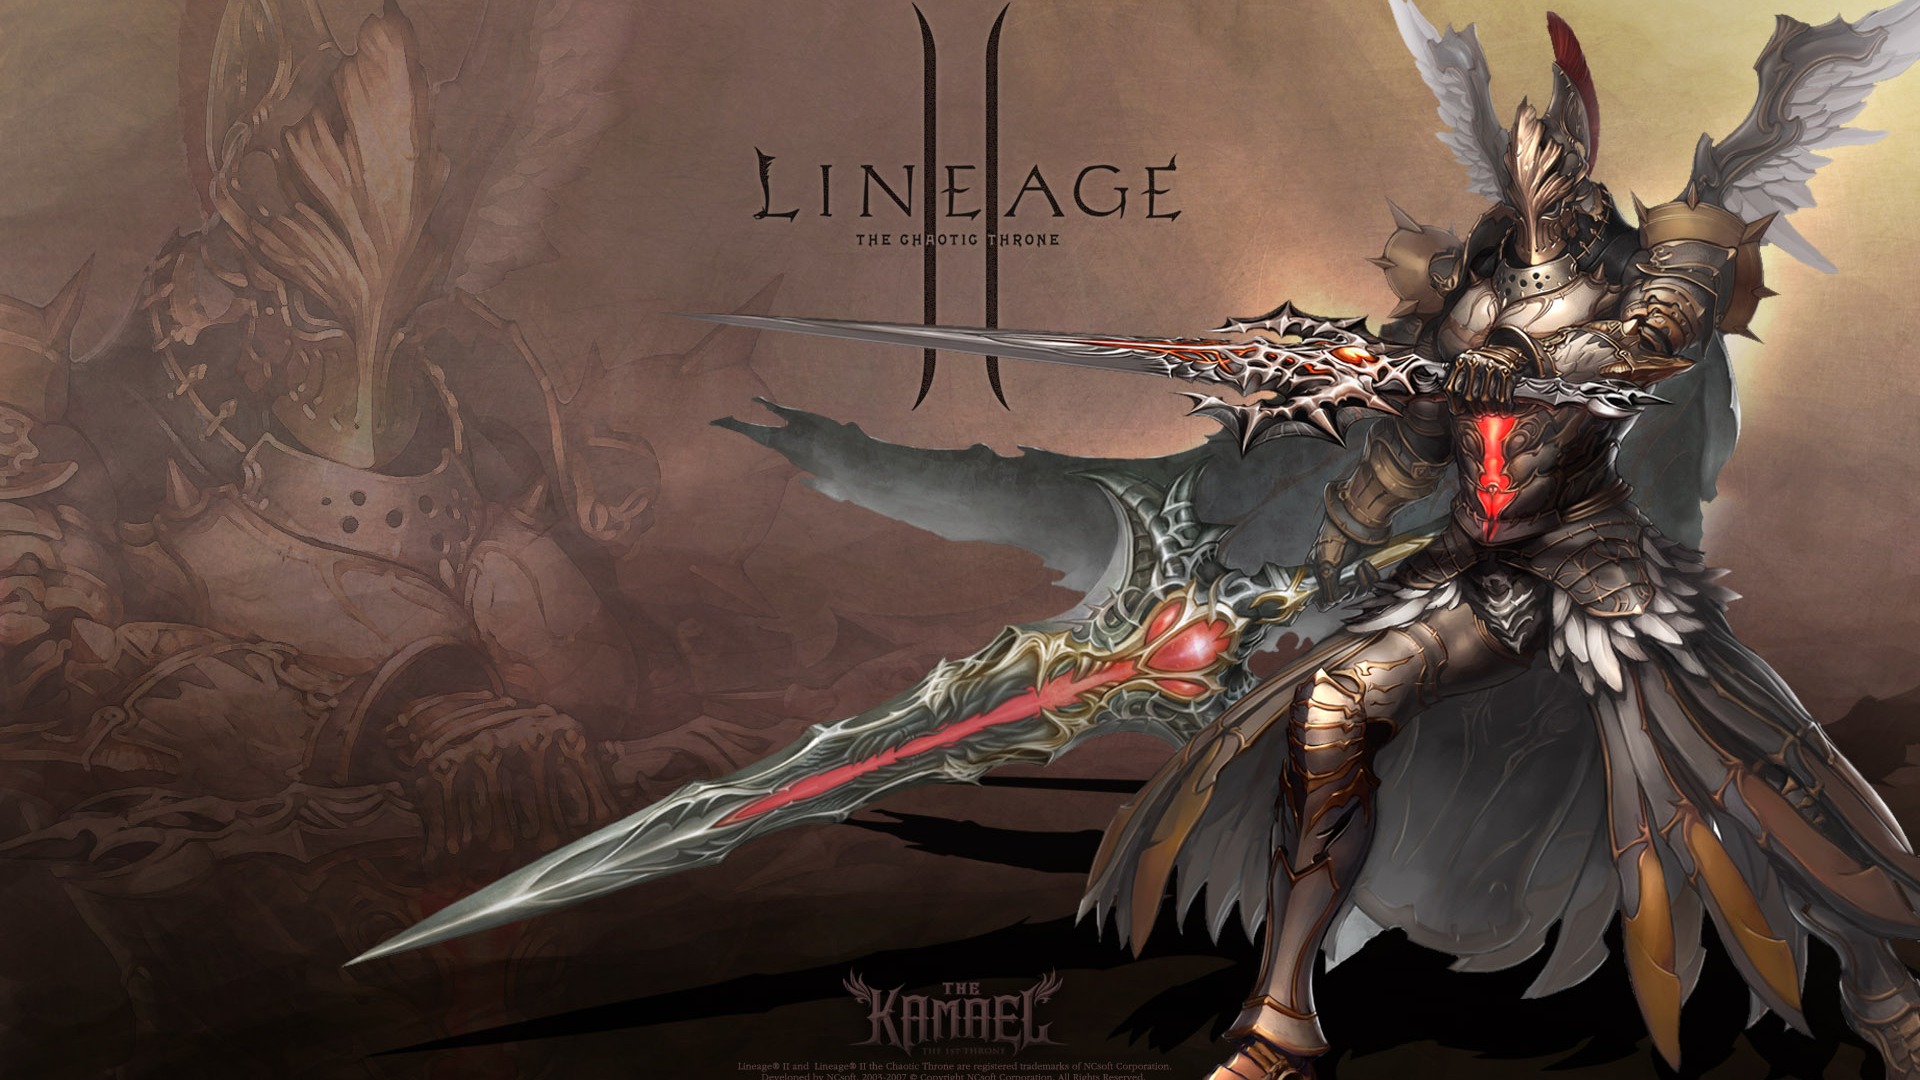 LINEAGE Ⅱ modeling HD gaming wallpapers #9 - 1920x1080